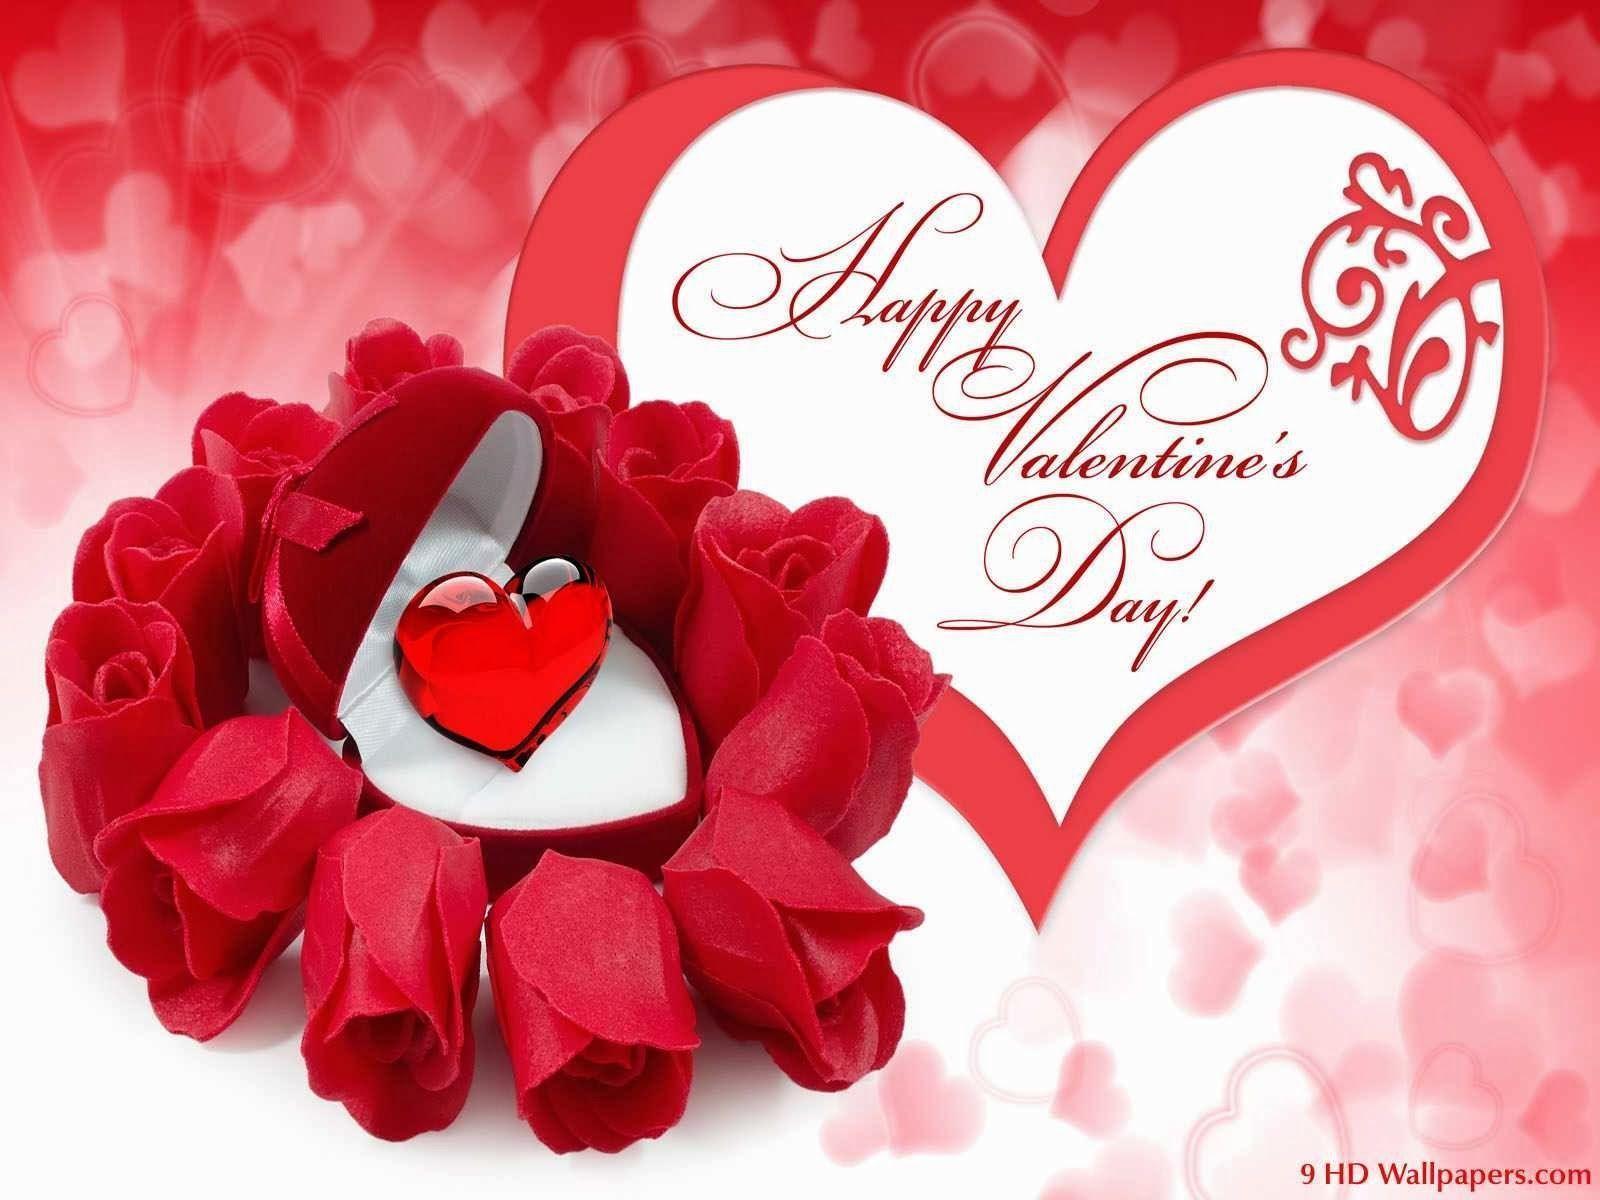 valentines day greetings 2015 Colection 1. Happy Valentines Day 2015